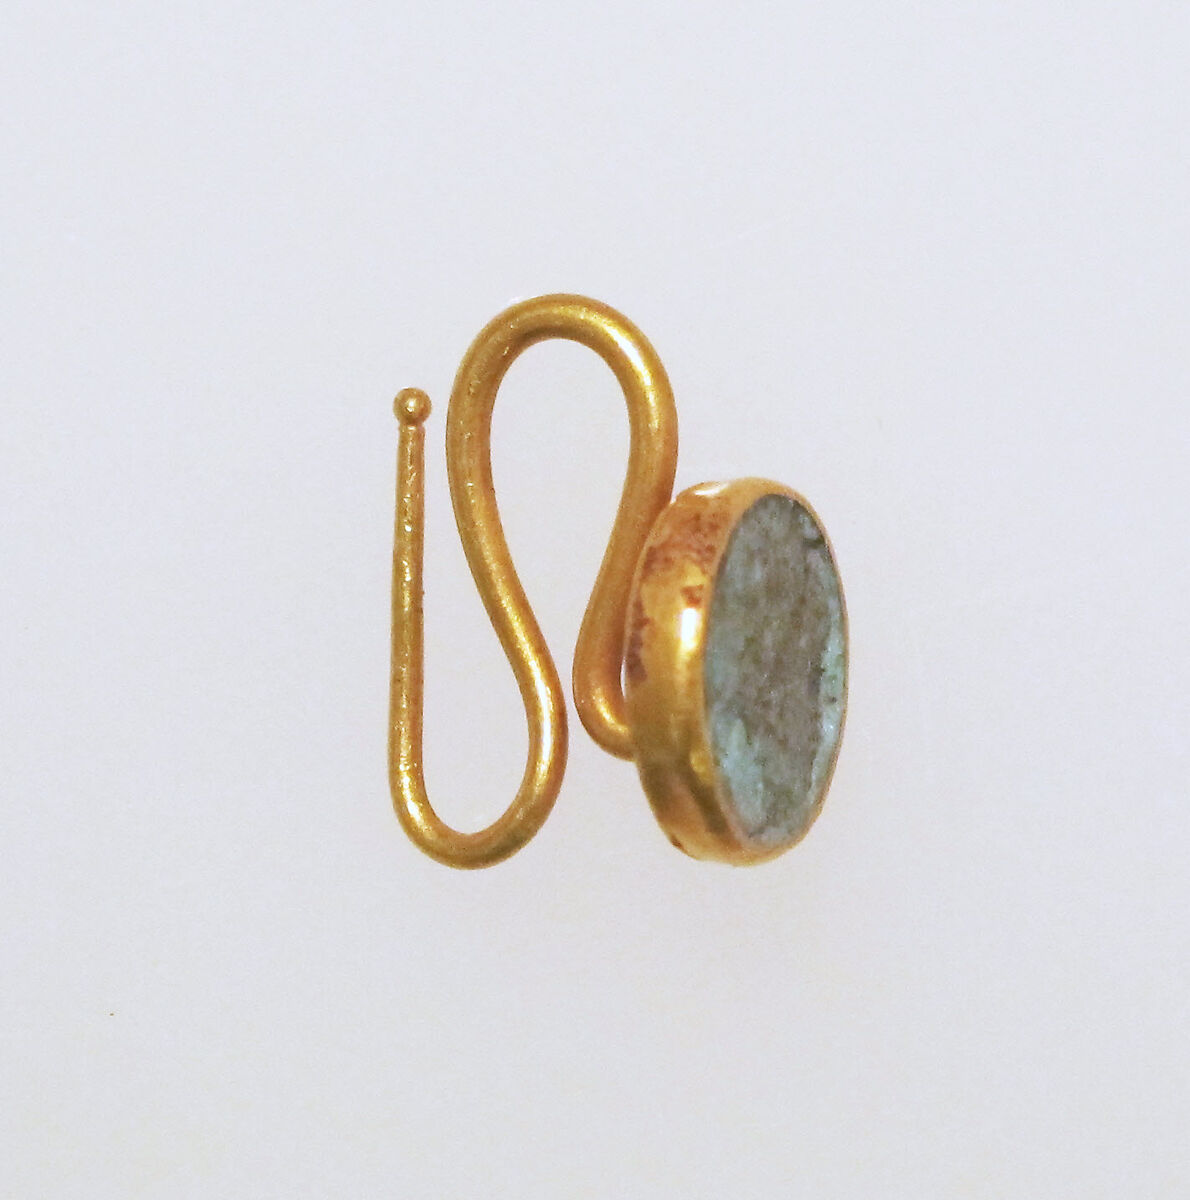 Earring-hook type with disc and paste setting, Gold, glass paste 